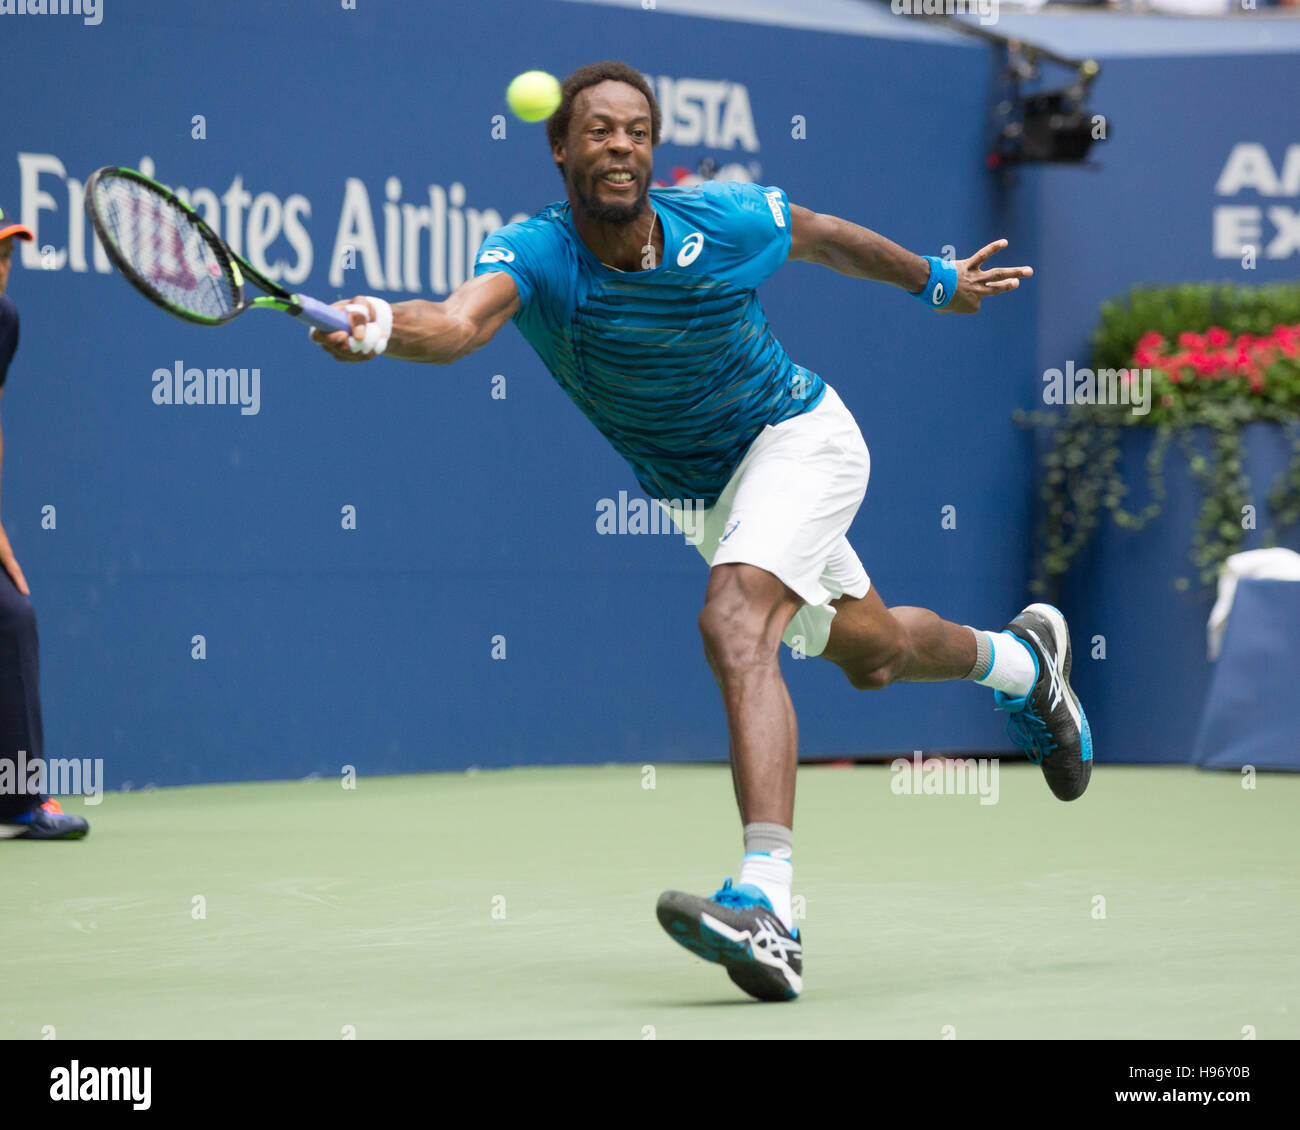 GAEL MONFILS (FRA) at the US Open 2014 Championships in Flushing Meadows,New York,USA Stock Photo